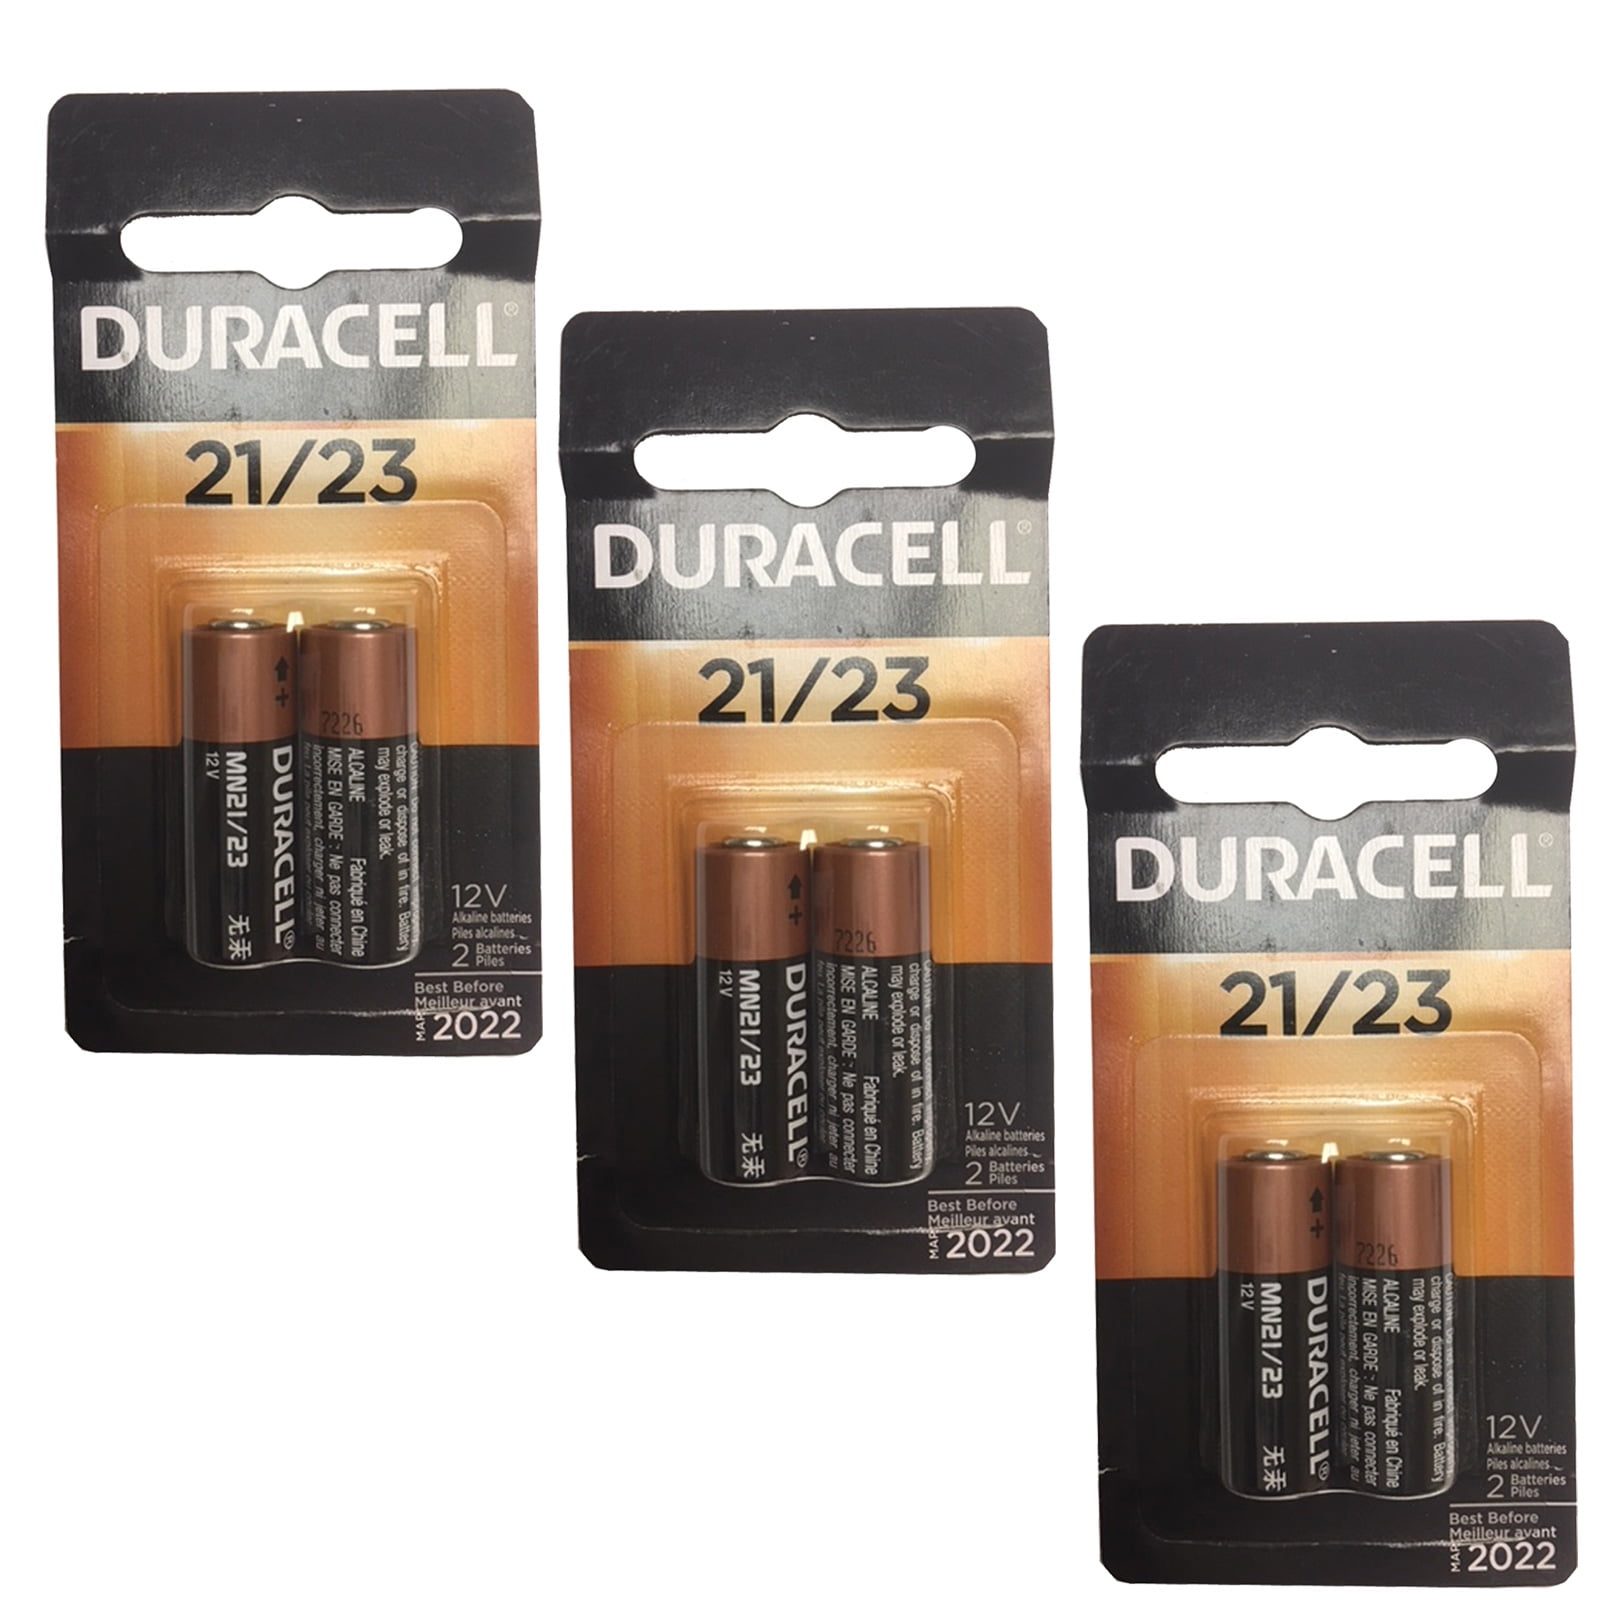 Ilc Replacement for Duracell Mn21/23 MN21/23 DURACELL